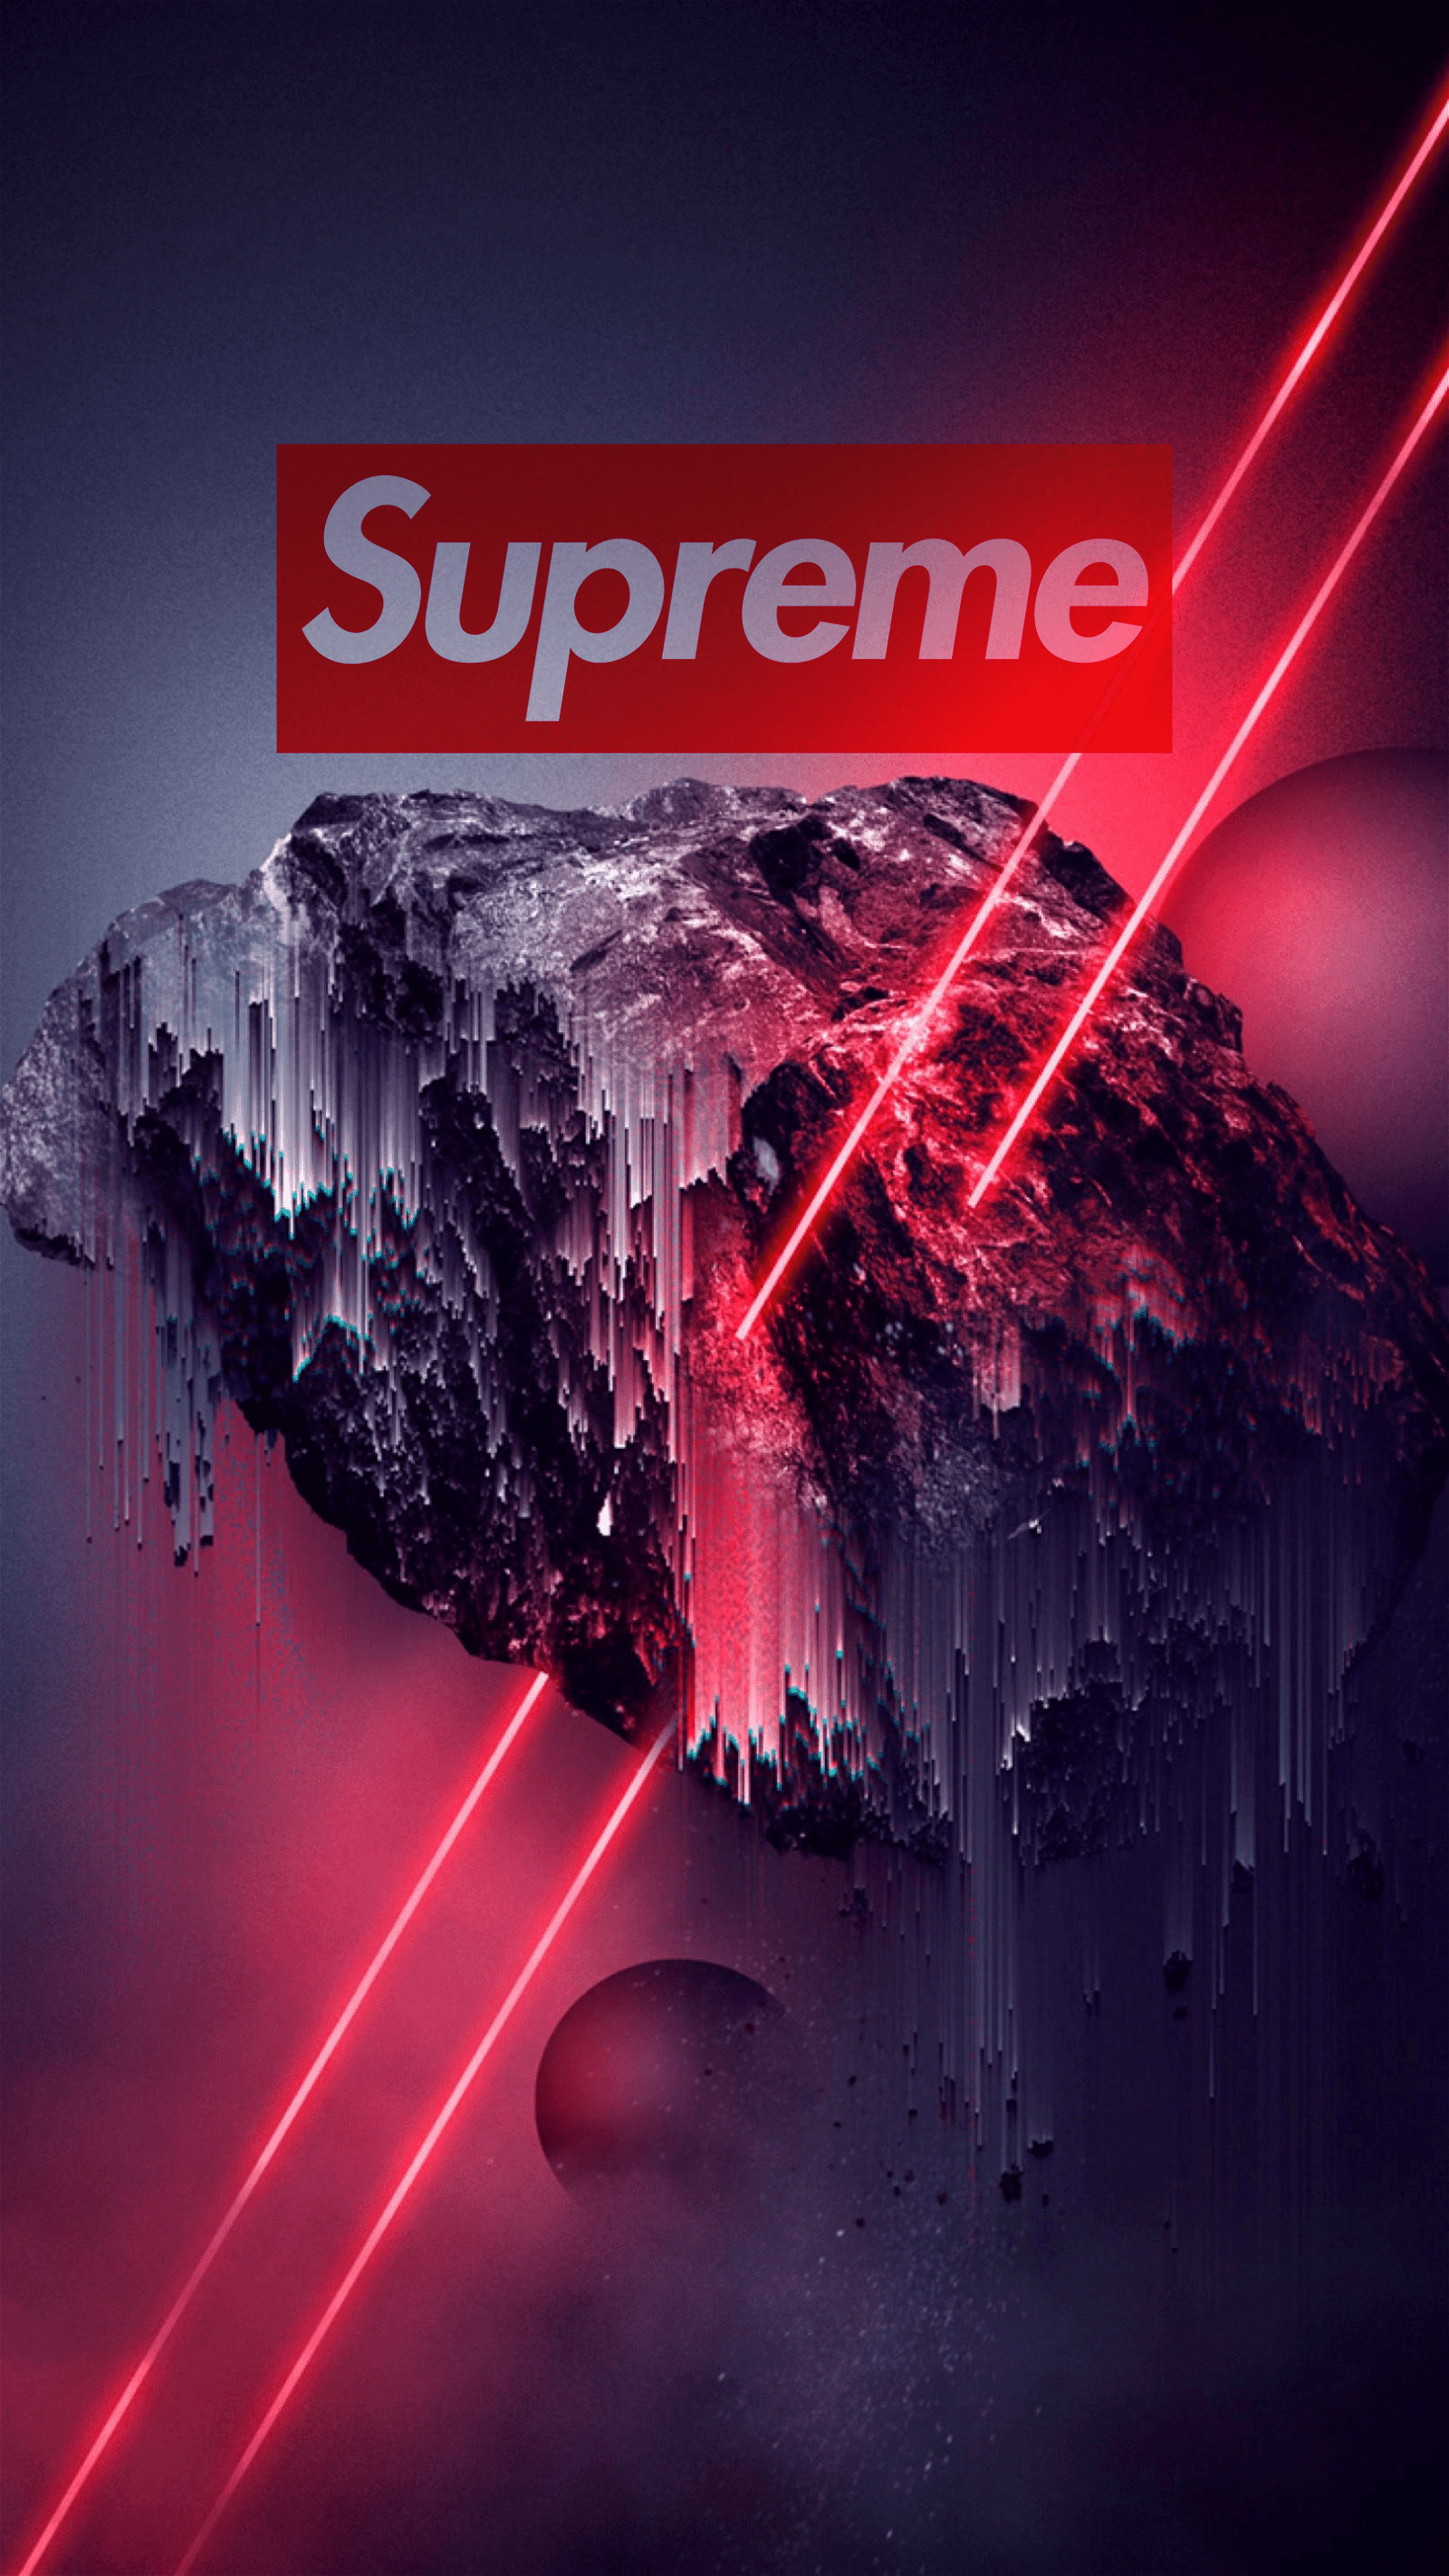 Supreme wallpaper for iPhone and Android. - Supreme